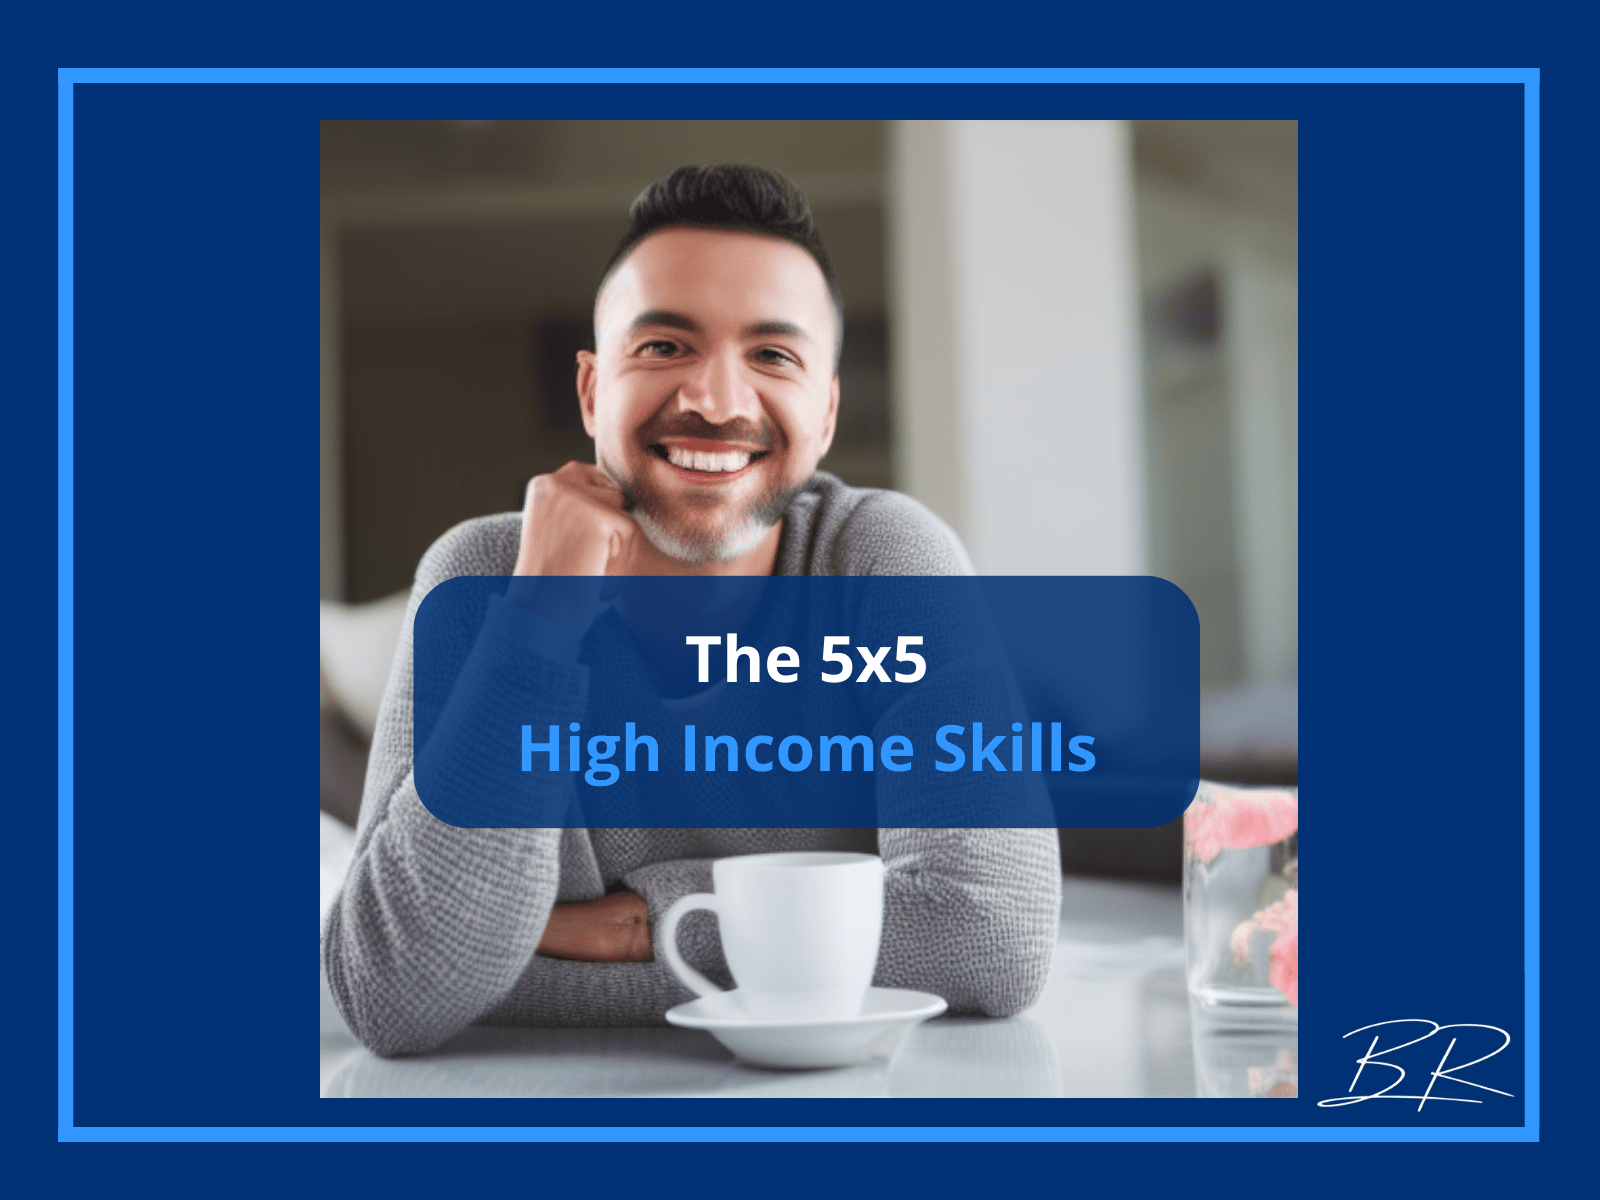 5x5 High Income Skills You Need To Learn